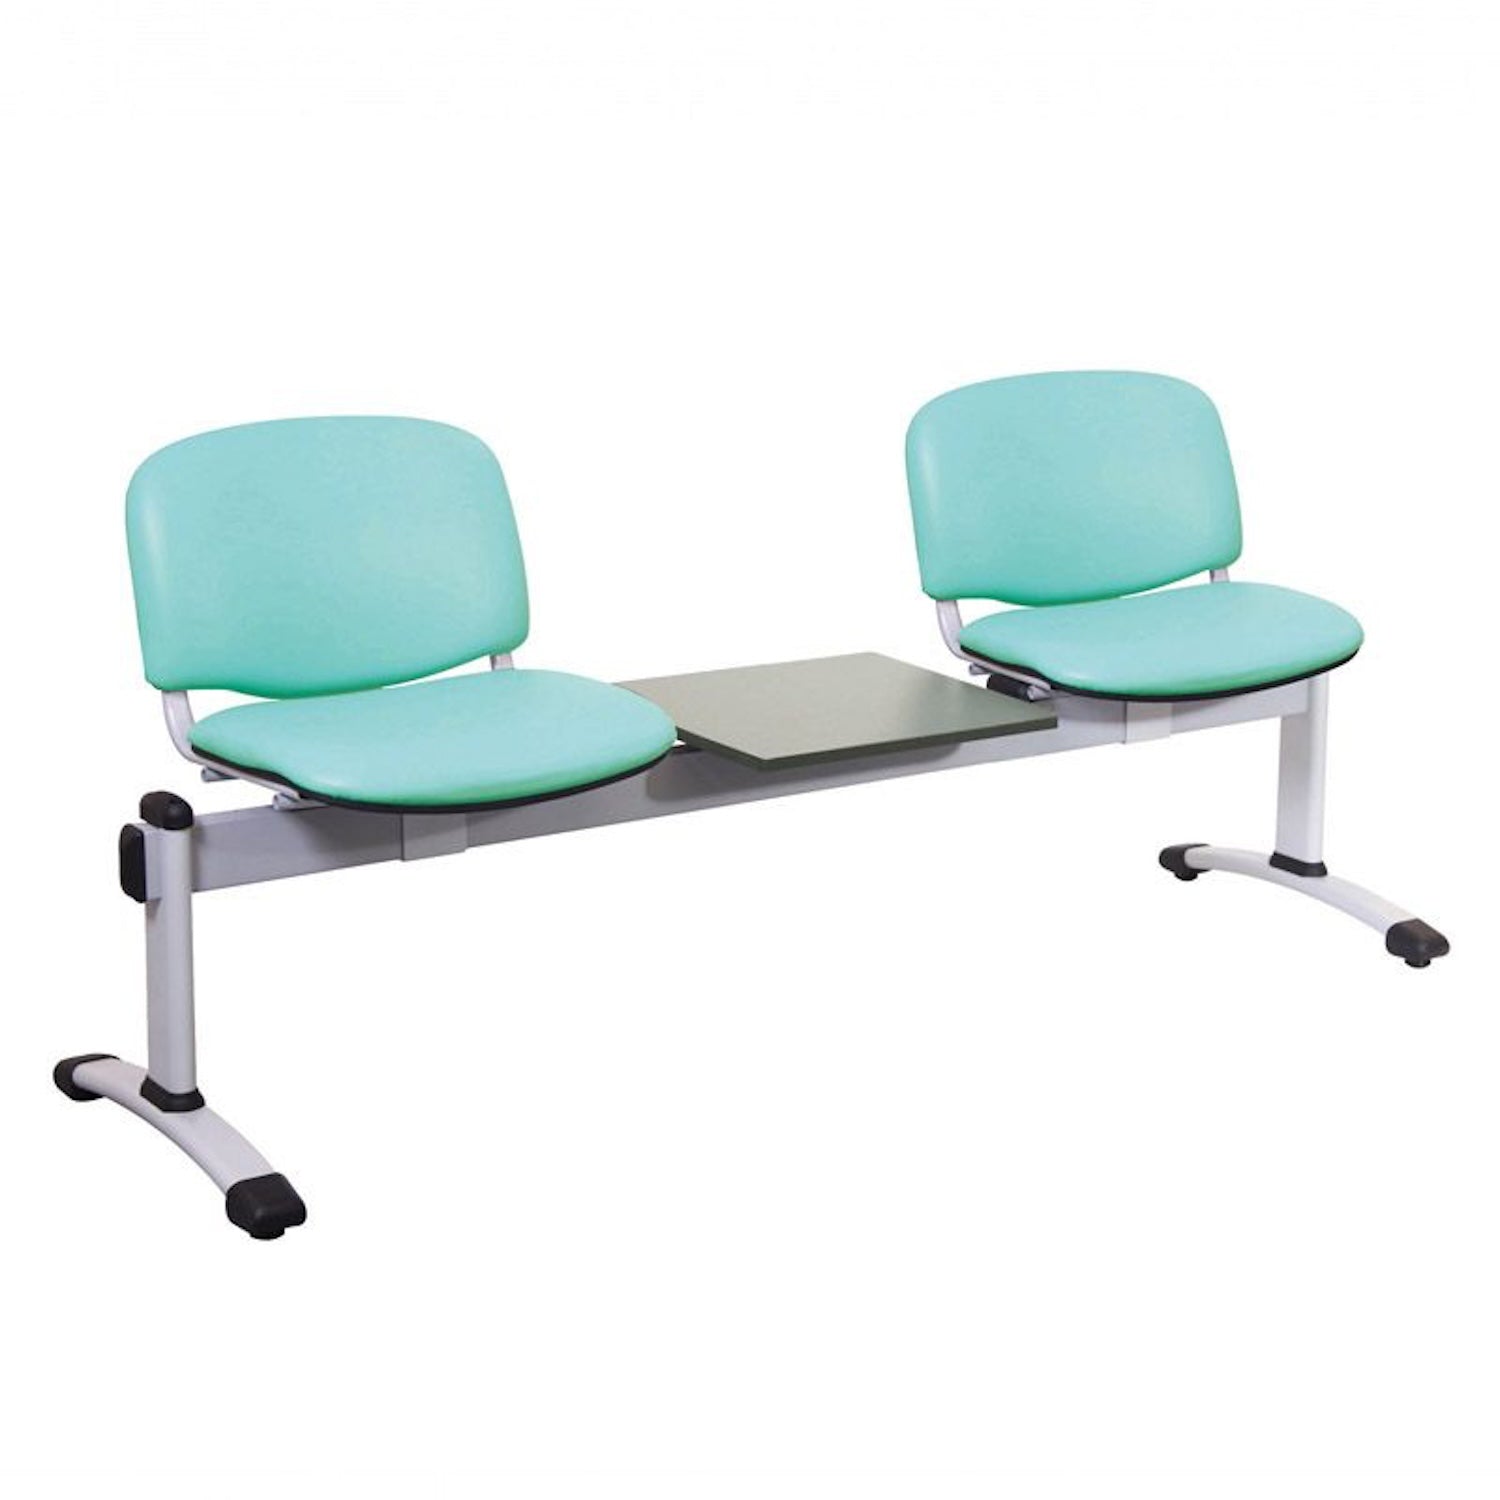 Sunflower Visitor 2 Anti-bacterial Vinyl Upholstery Seats & 1 Table Module in Mint